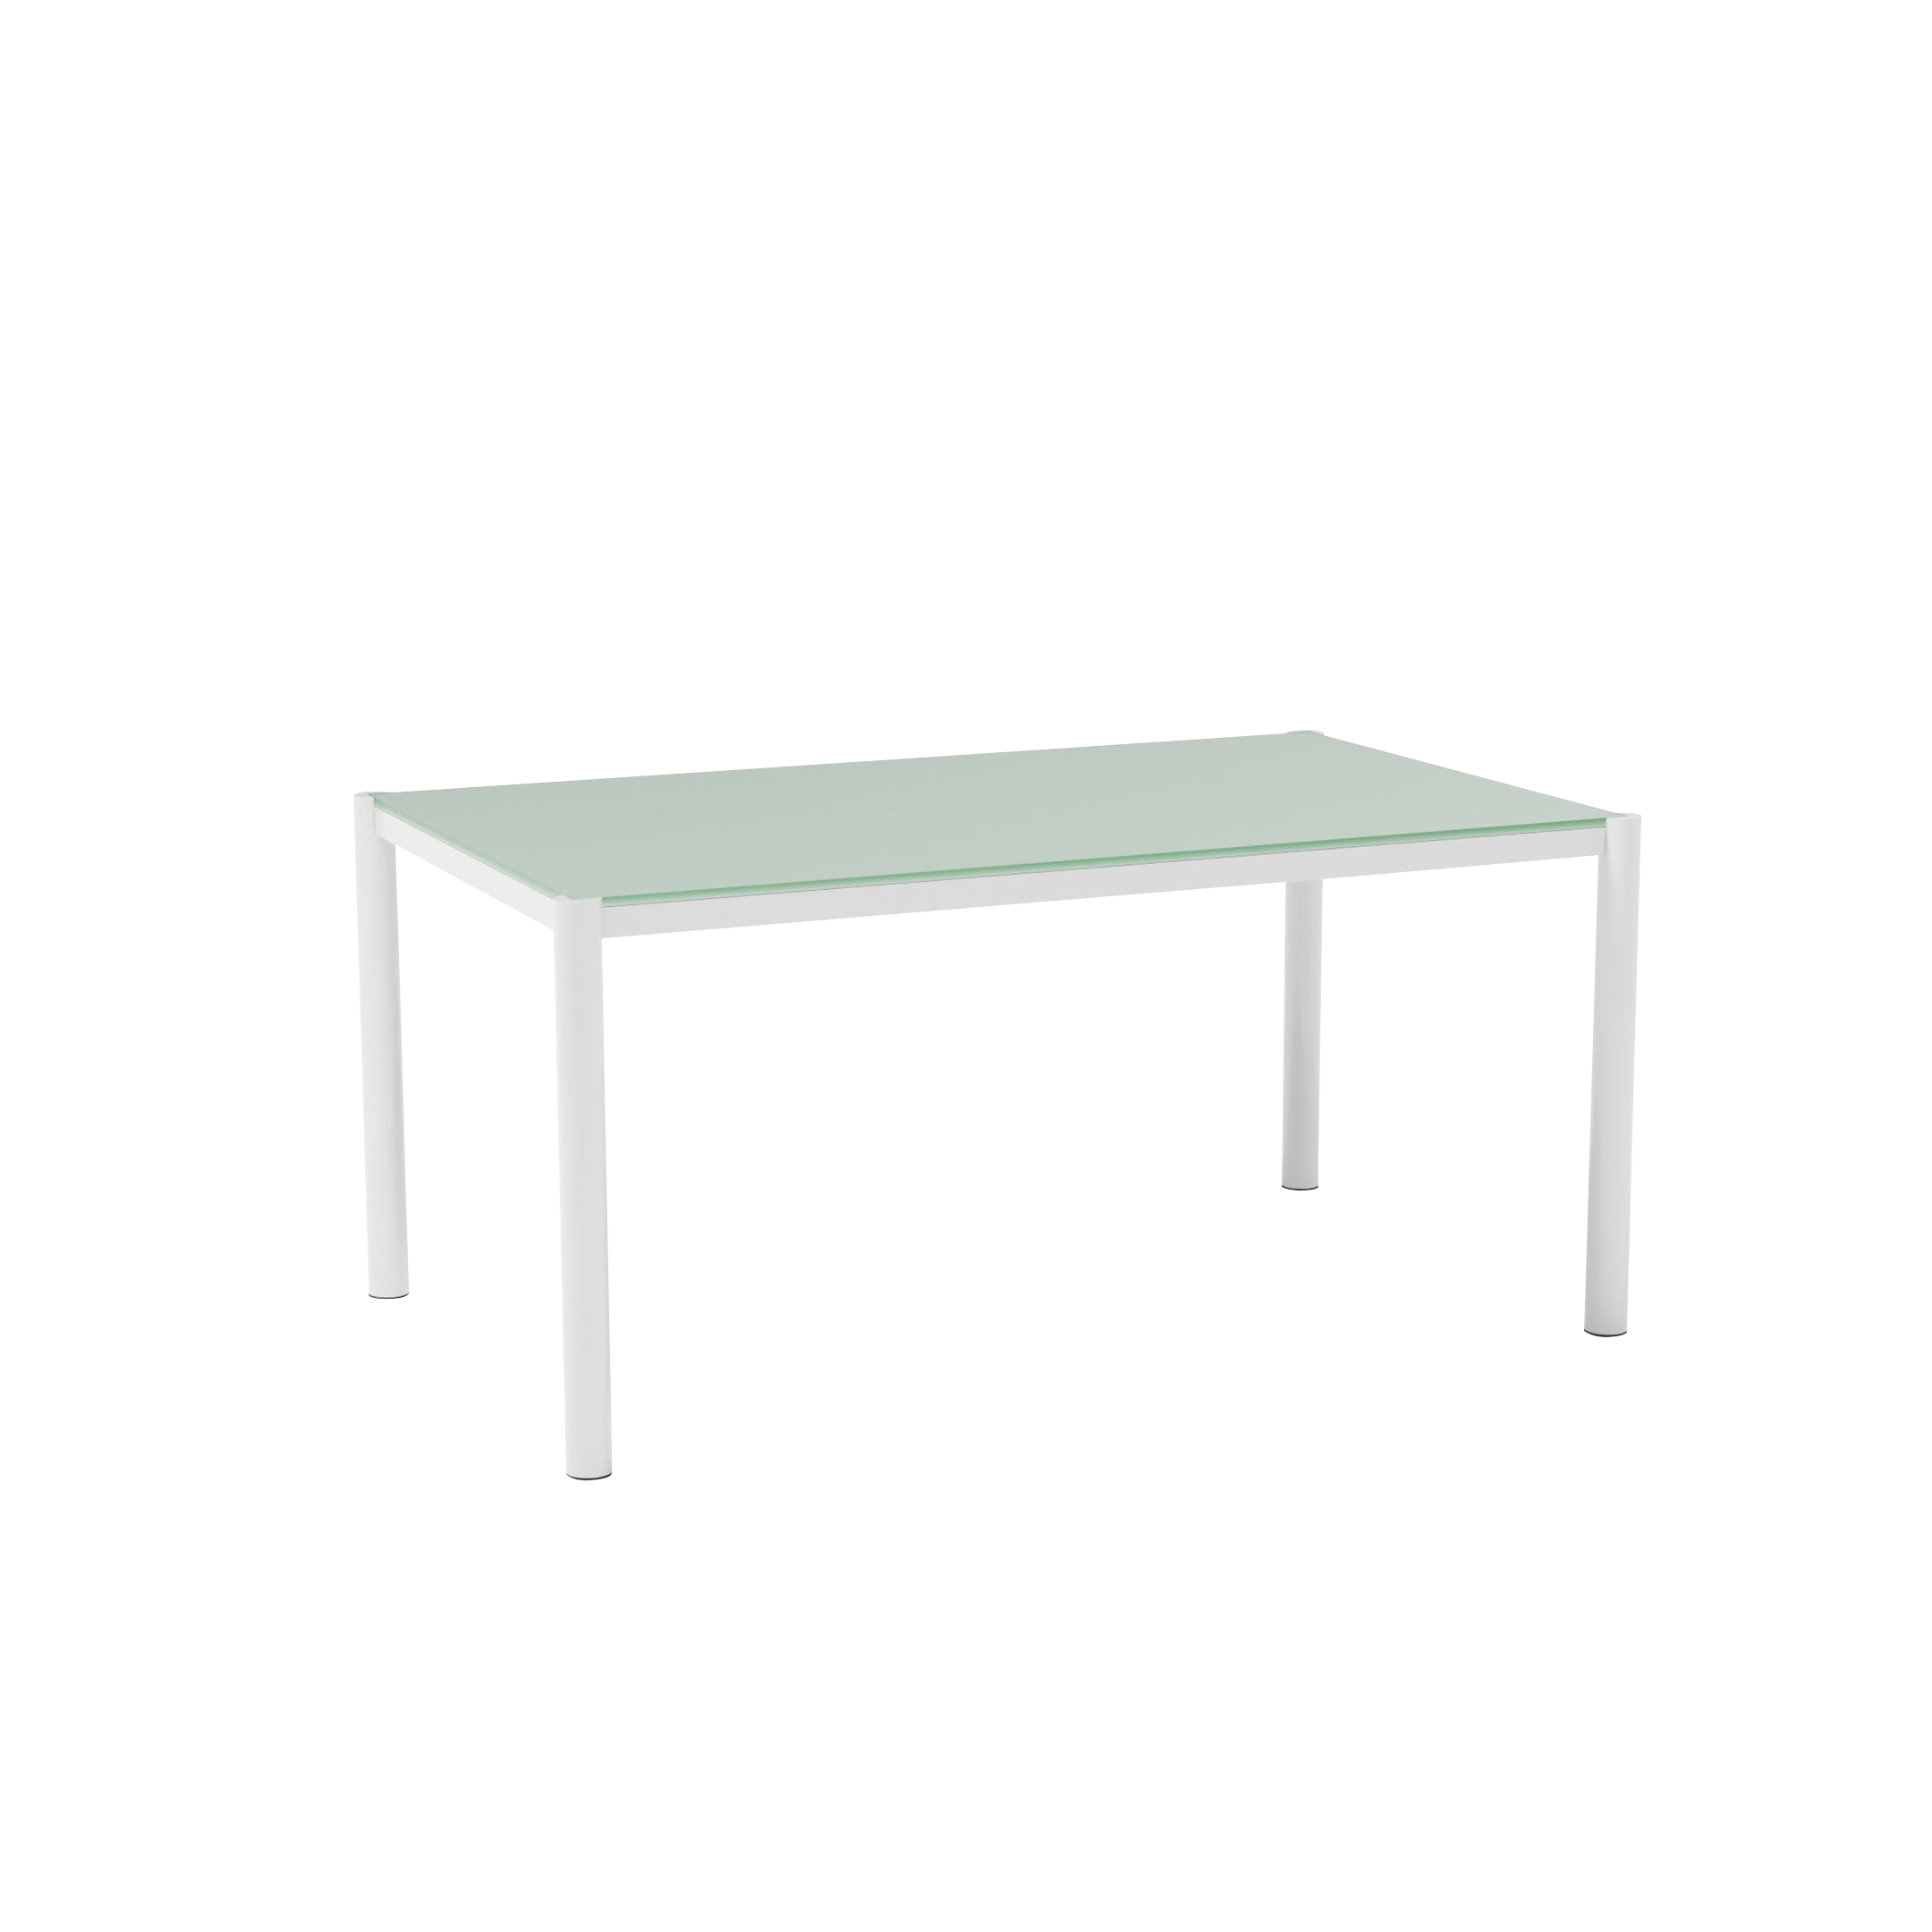 Get-Together Dining Table 60"